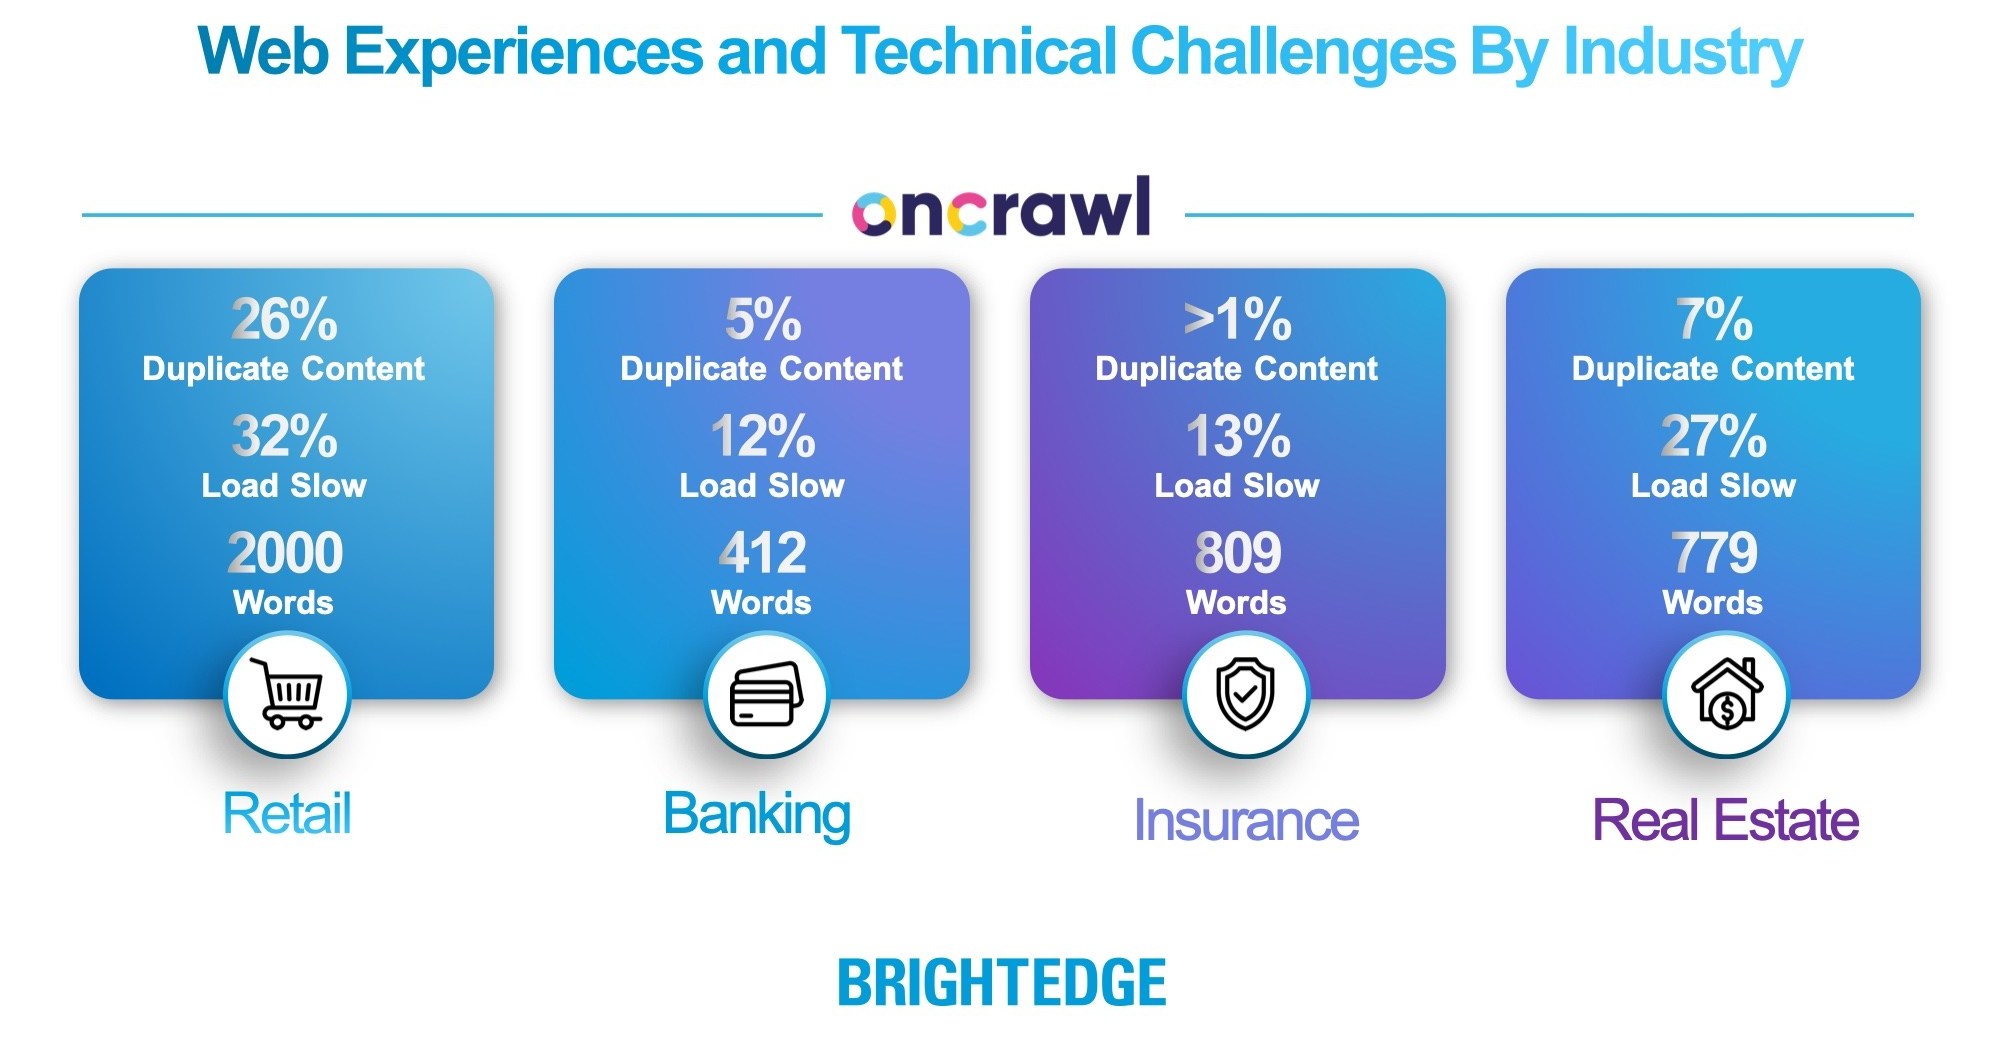 BrightEdge and Oncrawl Create Industry’s First Intelligent System for SEO